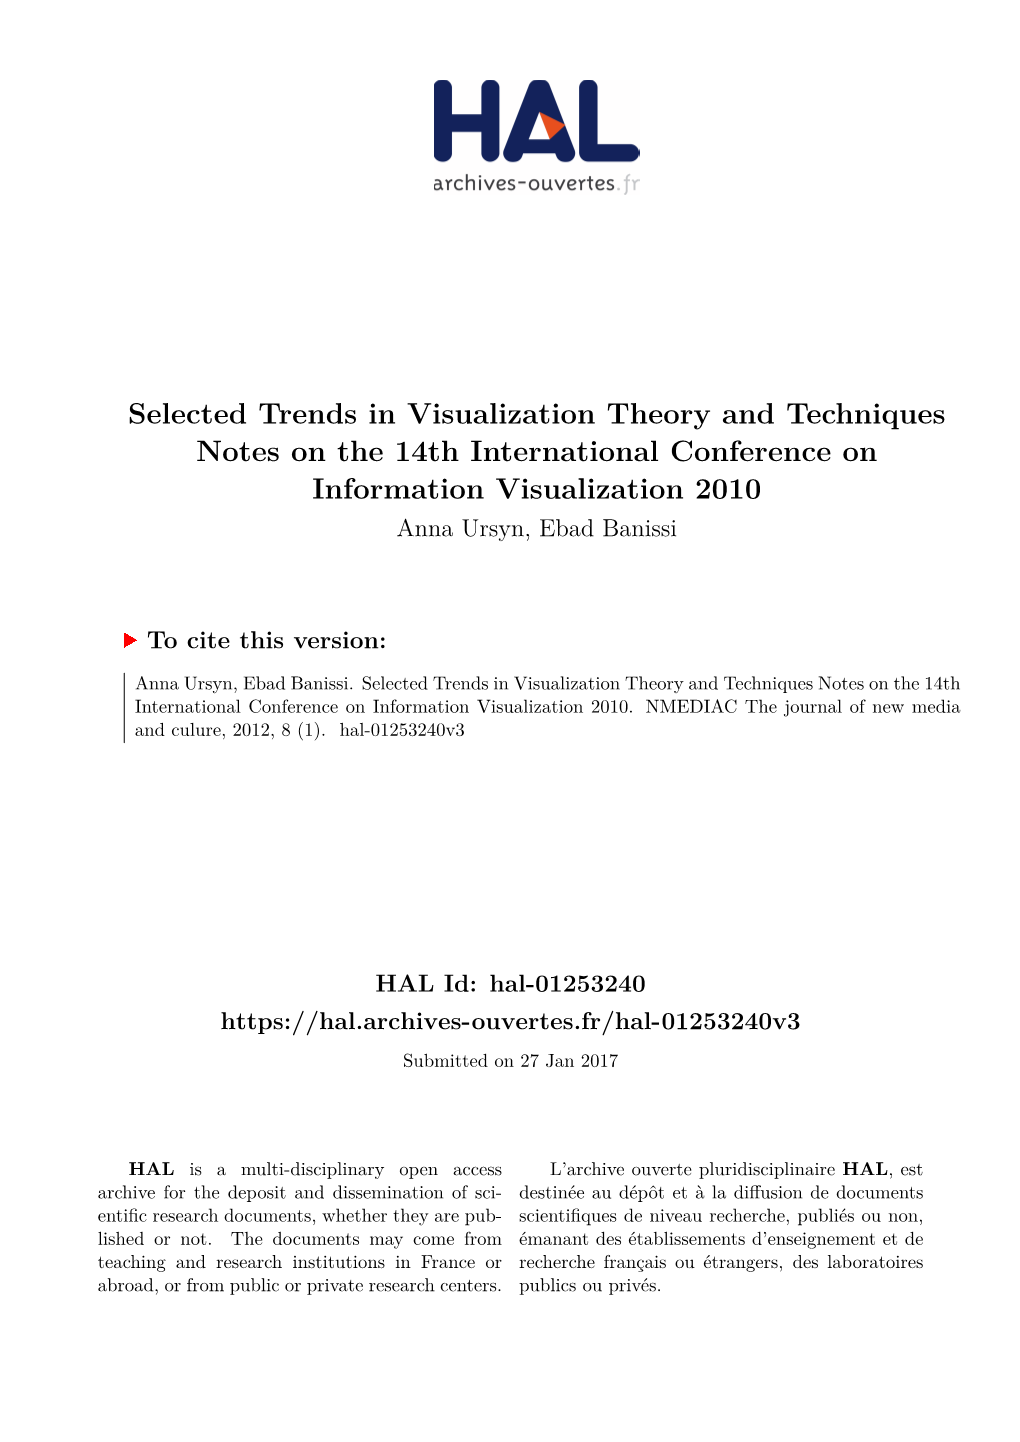 Selected Trends in Visualization Theory and Techniques Notes on the 14Th International Conference on Information Visualization 2010 Anna Ursyn, Ebad Banissi